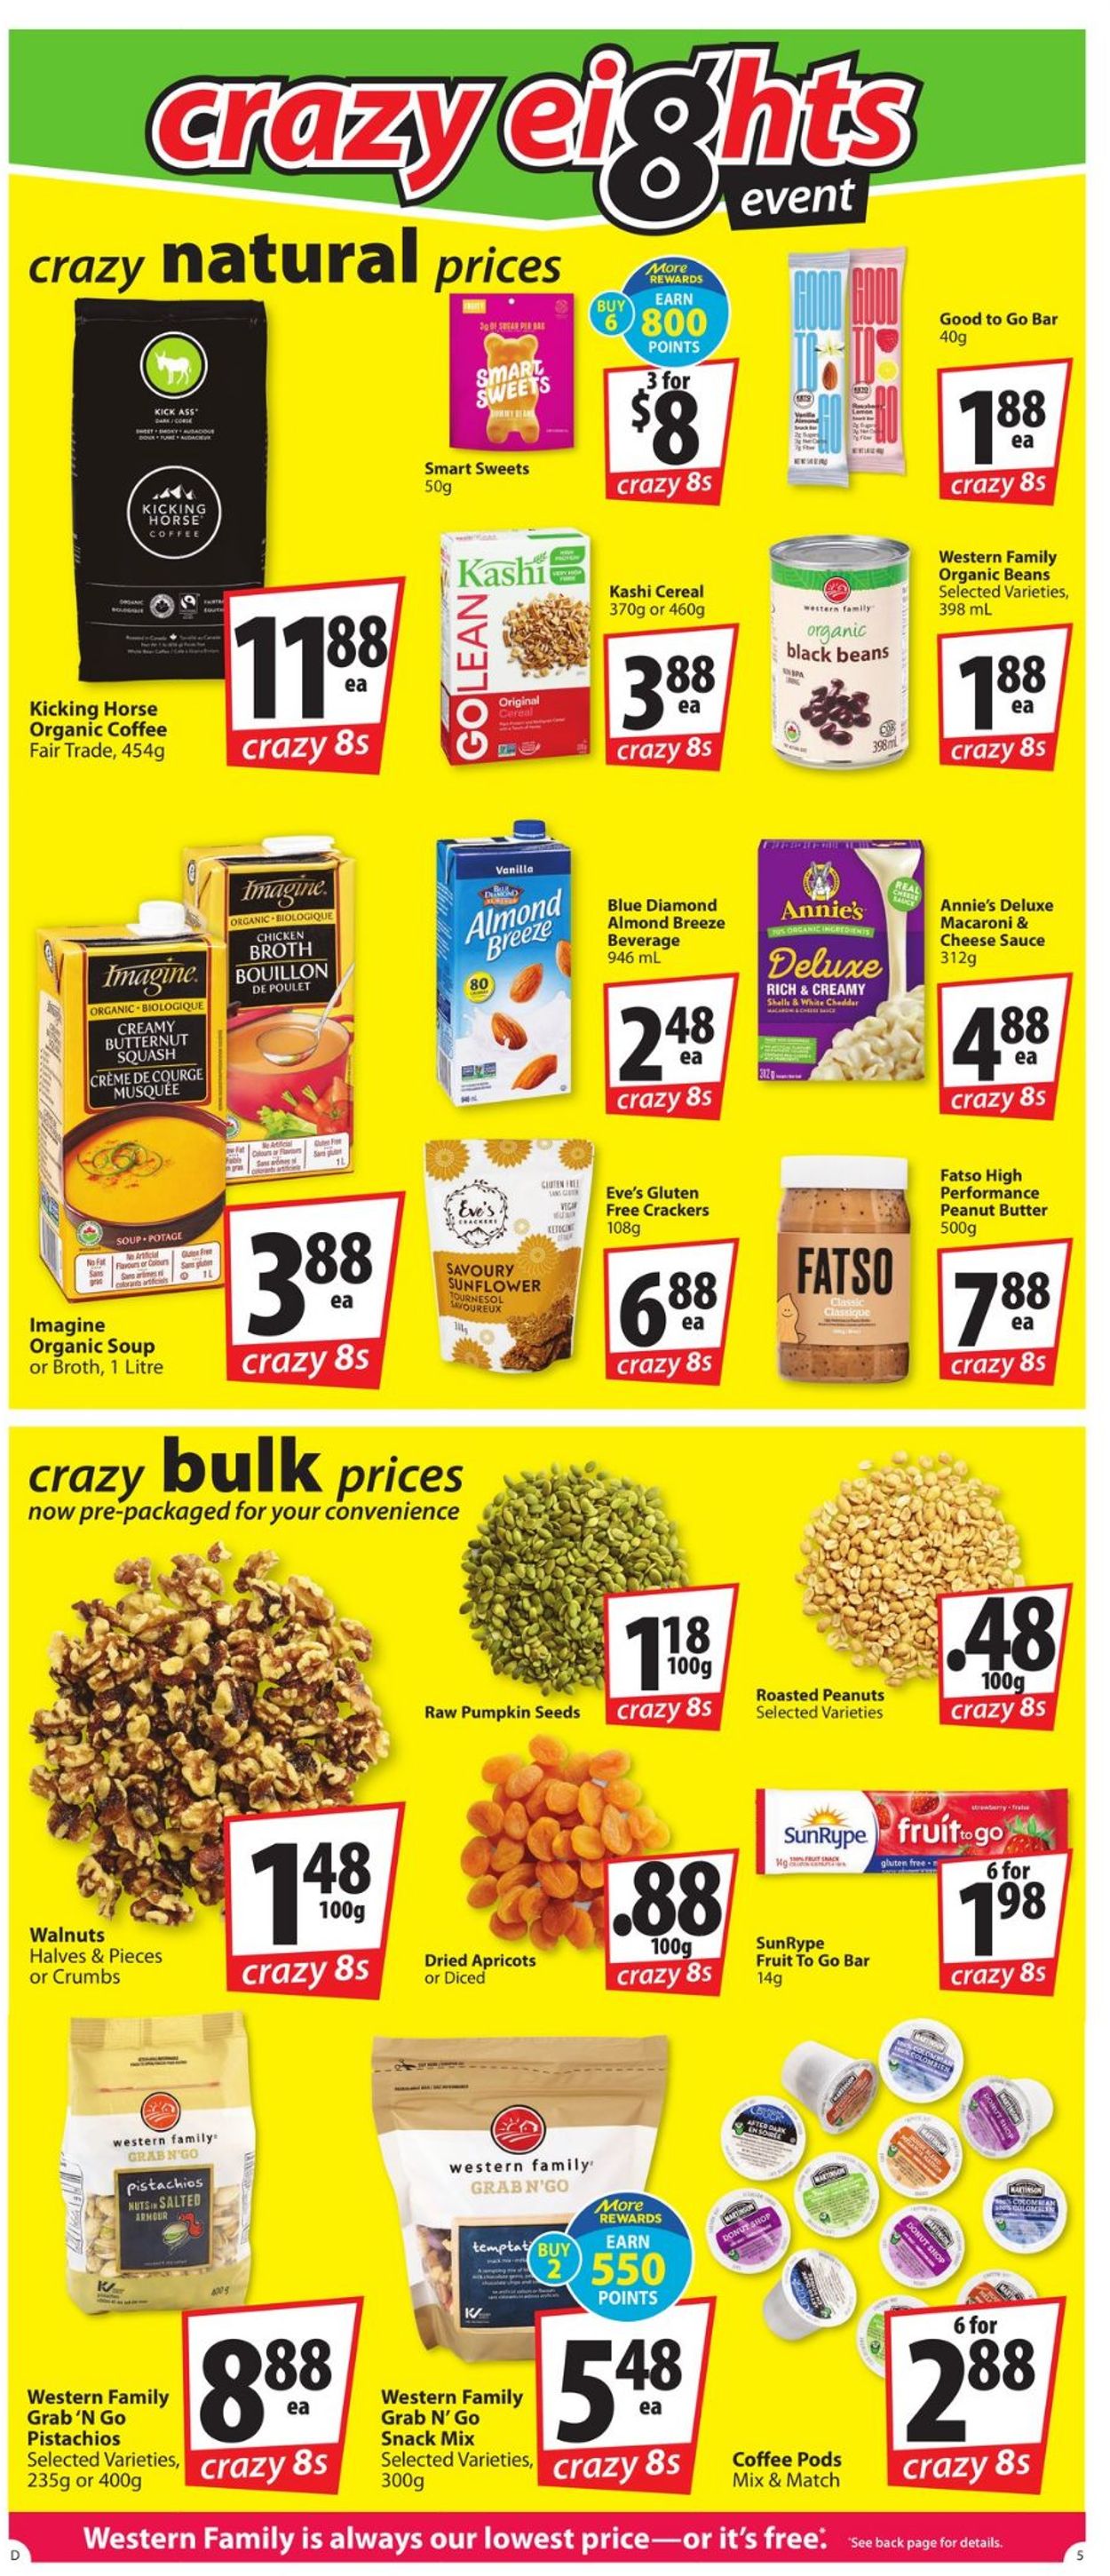 Save-On-Foods - Crazy Eigths 2021 Flyer - 01/02-01/06/2021 (Page 5)